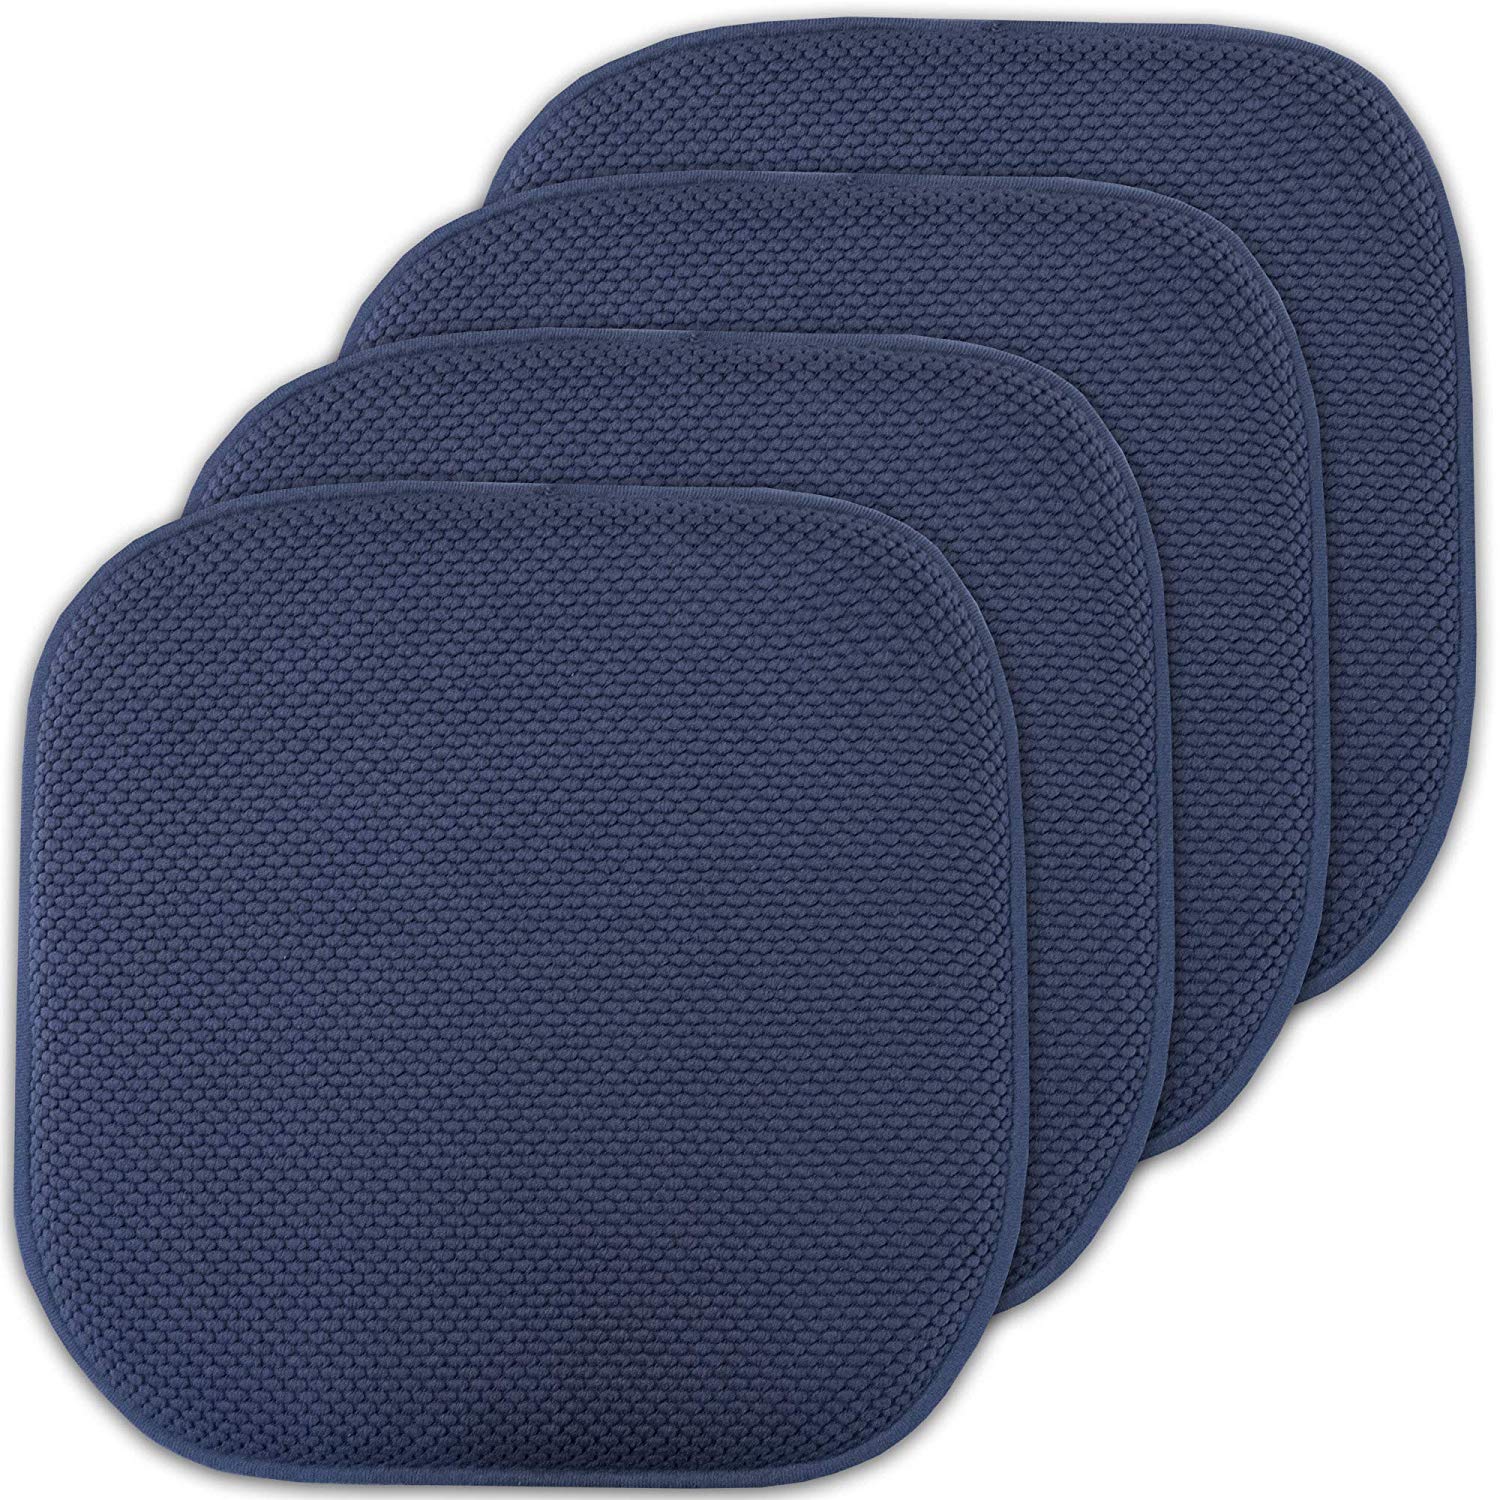 Sweet Home Collection Memory Foam Chair Cushion